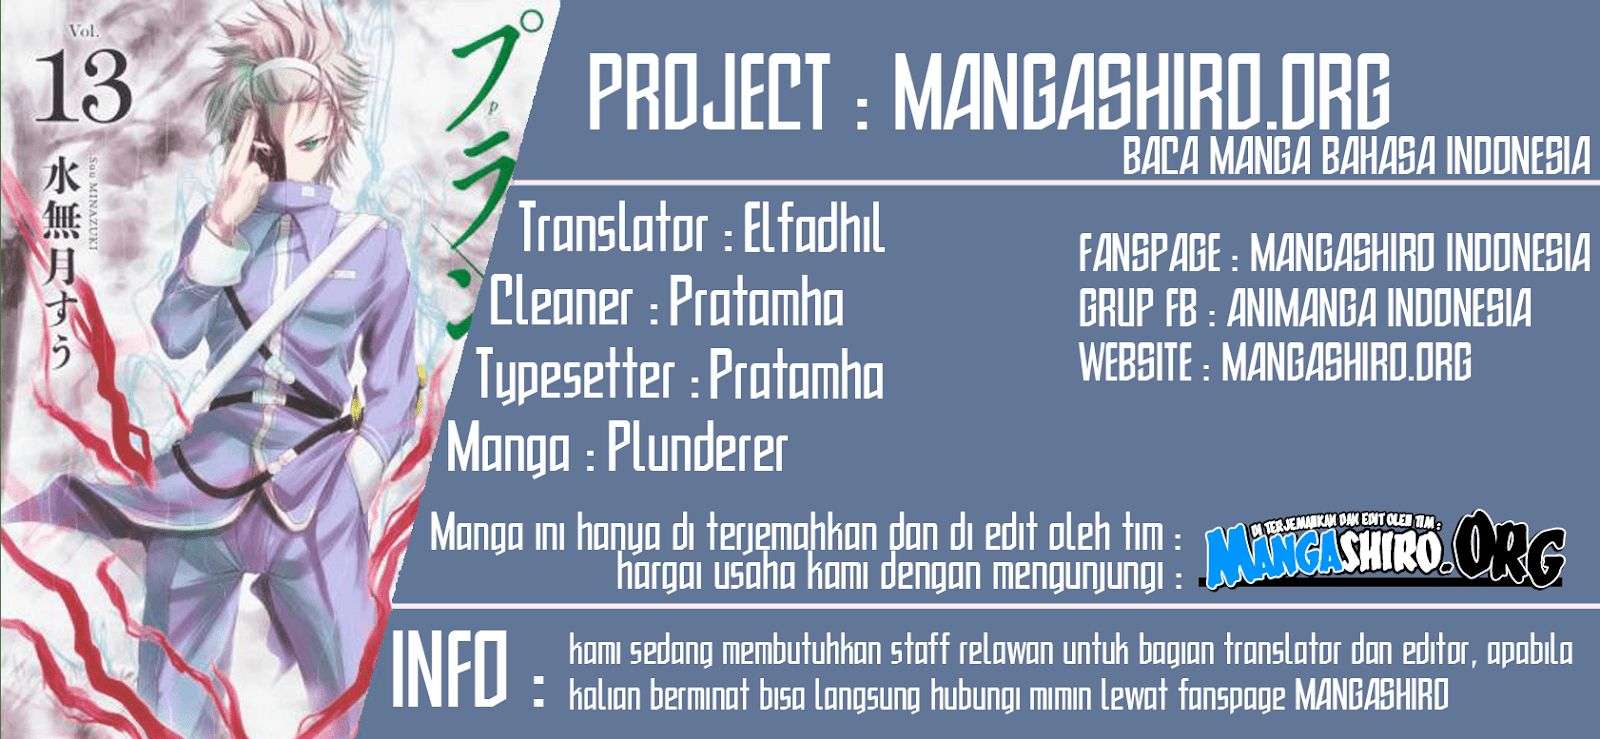 Plunderer Chapter 46 Bahasa Indonesia